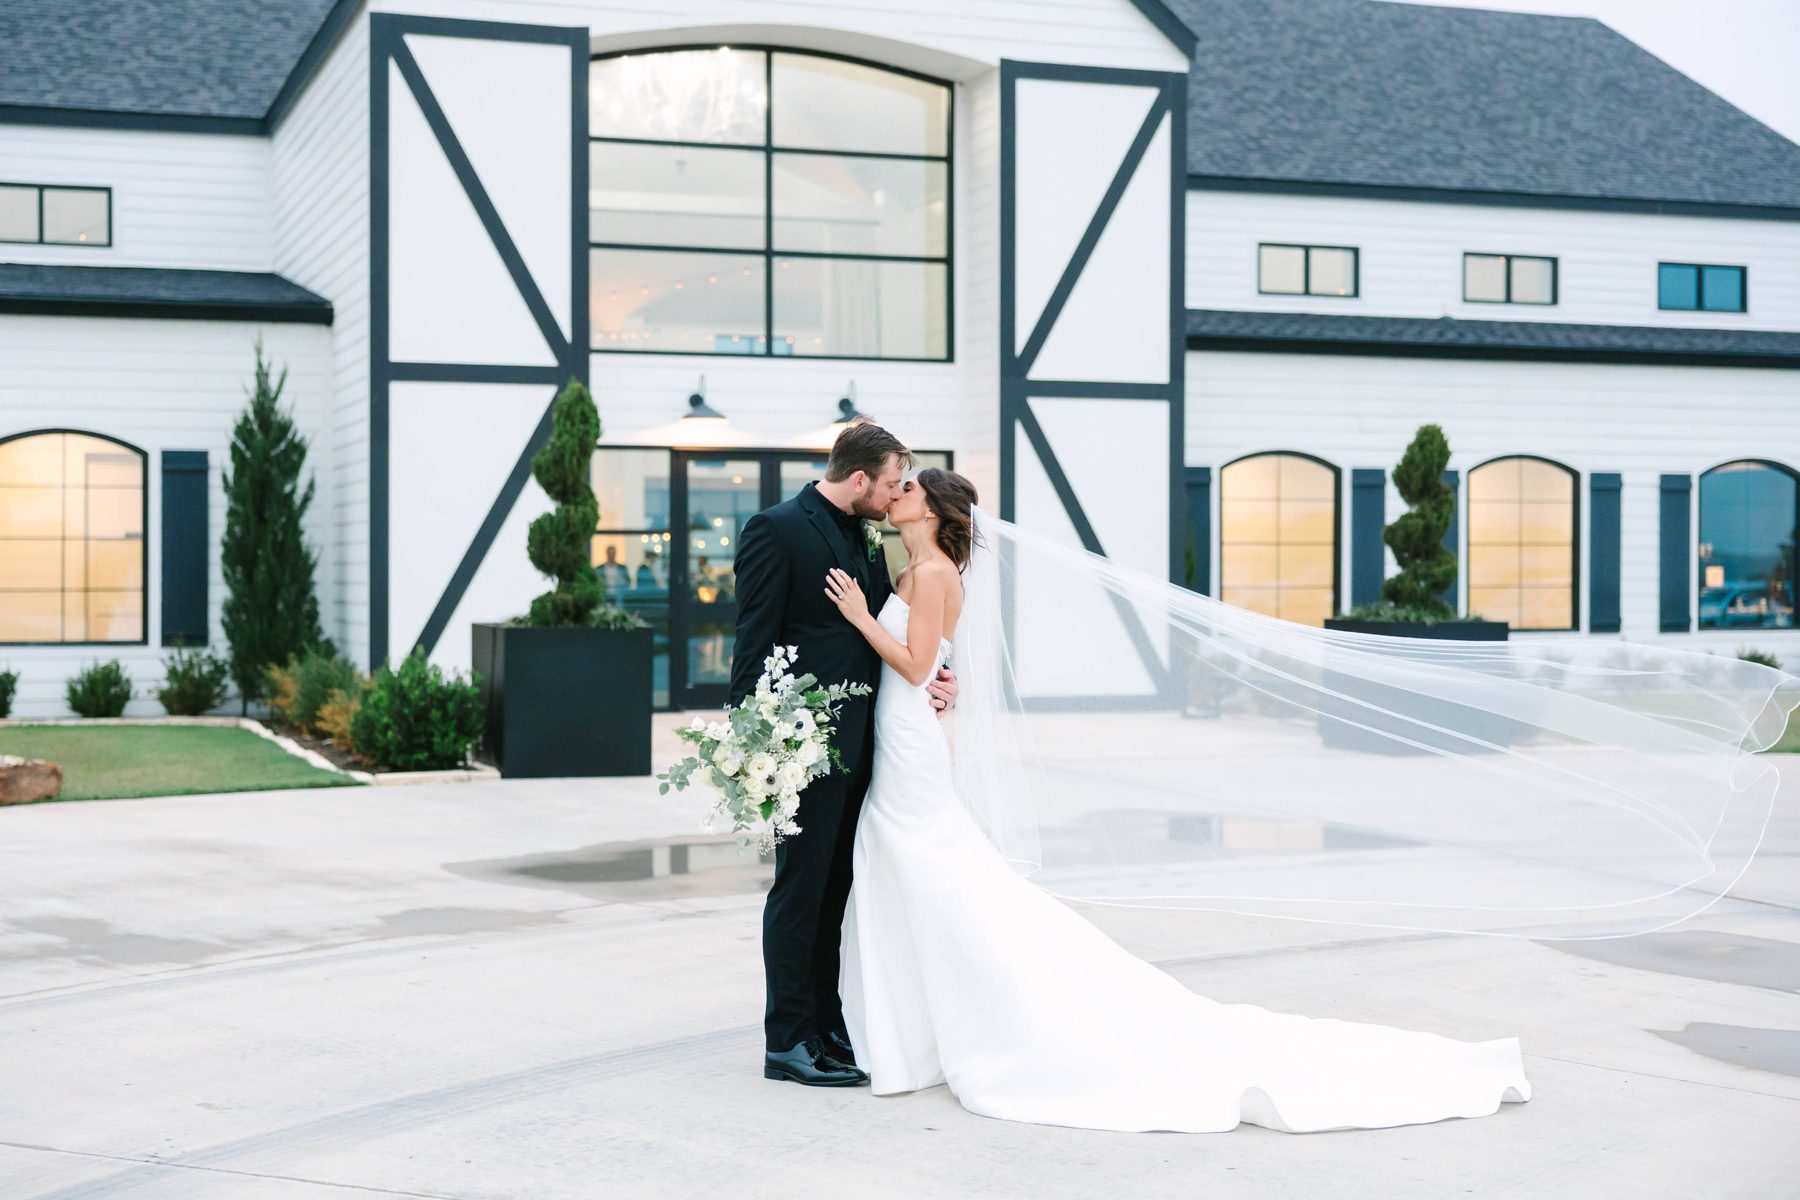 Bride and groom kissing in front of The Gardenia, a wedding venue in North Texas